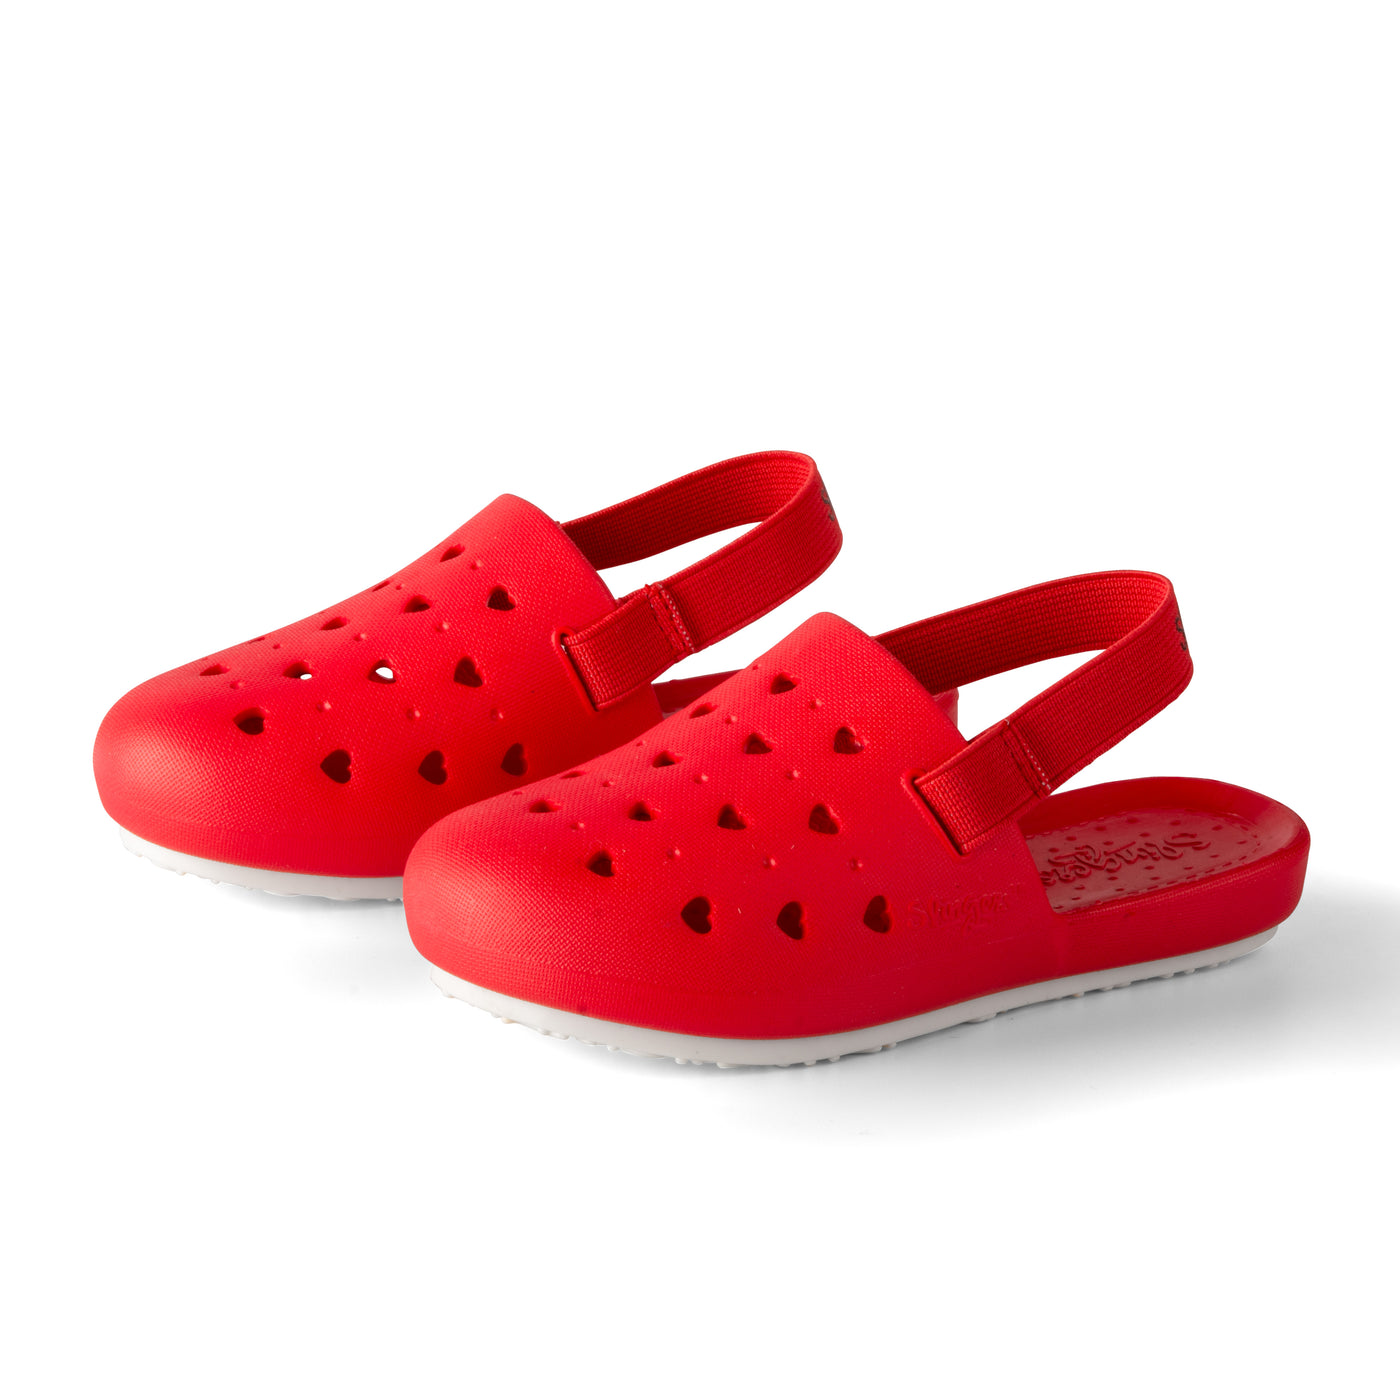 RED SOLID JUVENILE SLINGERS <span style="font-size: 12px; font-weight: normal;"><br> Kids water shoe <br> *Runs true to size compared to EU sizing